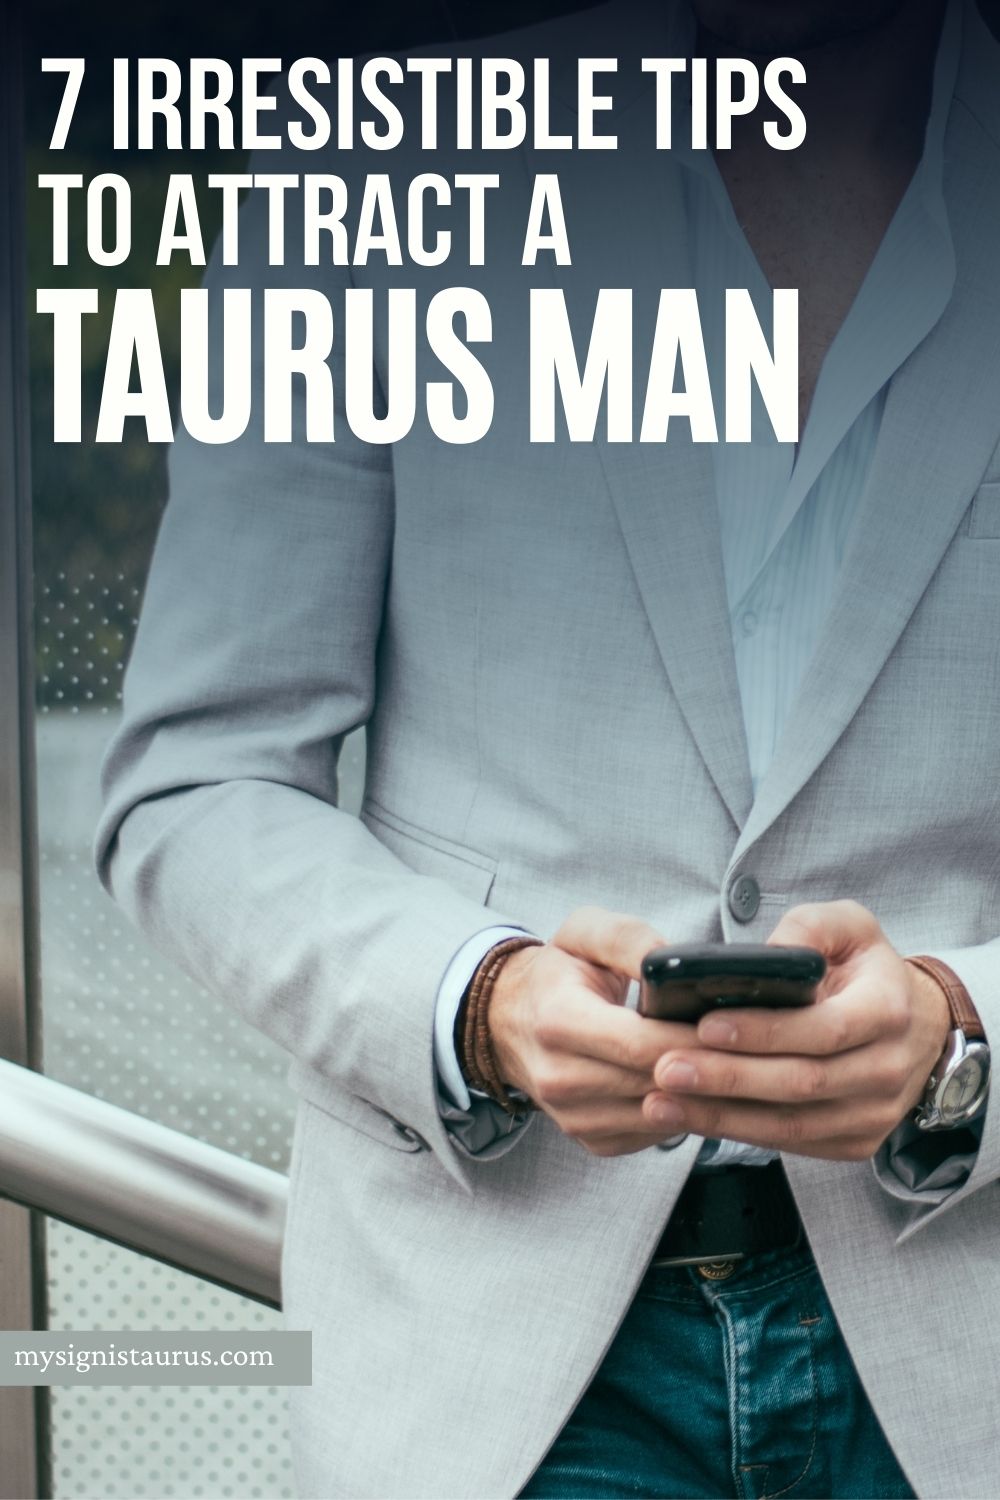 How To Attract A Taurus Man (Irresistible Tips To Help Him Chase You), Taurus boy seduction